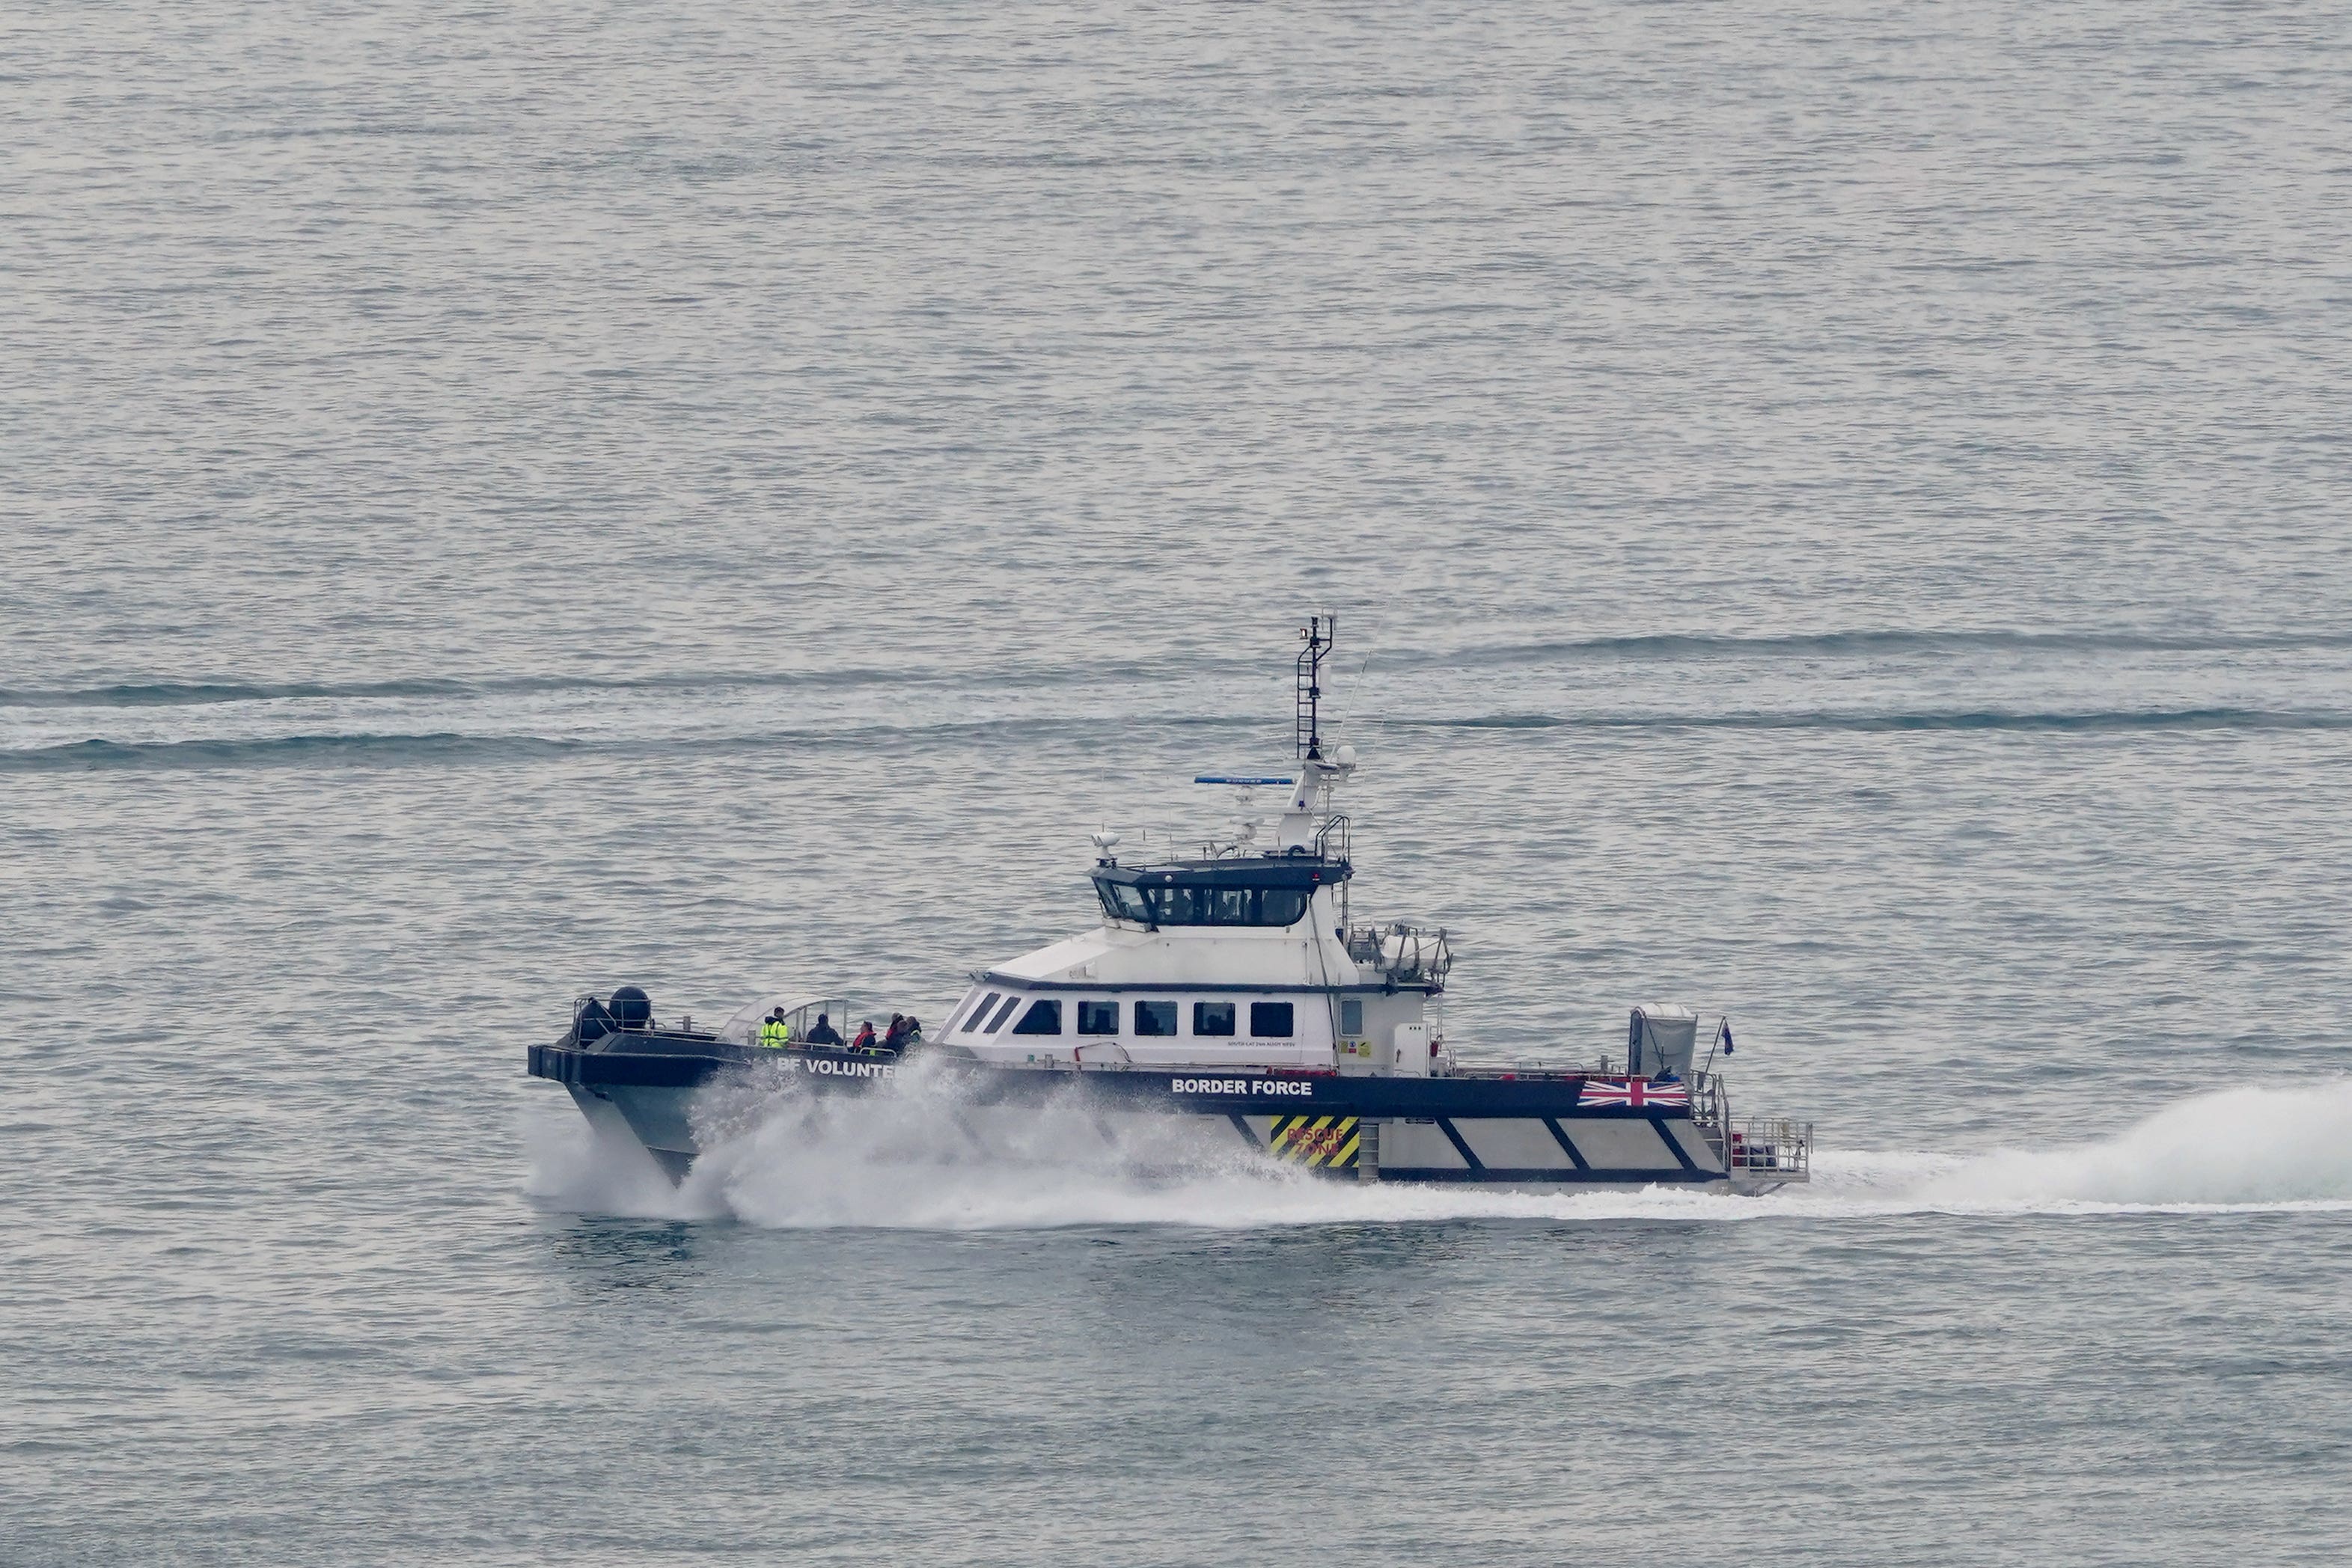 A Border Force boat in the English Channel (Gareth Fuller/PA)